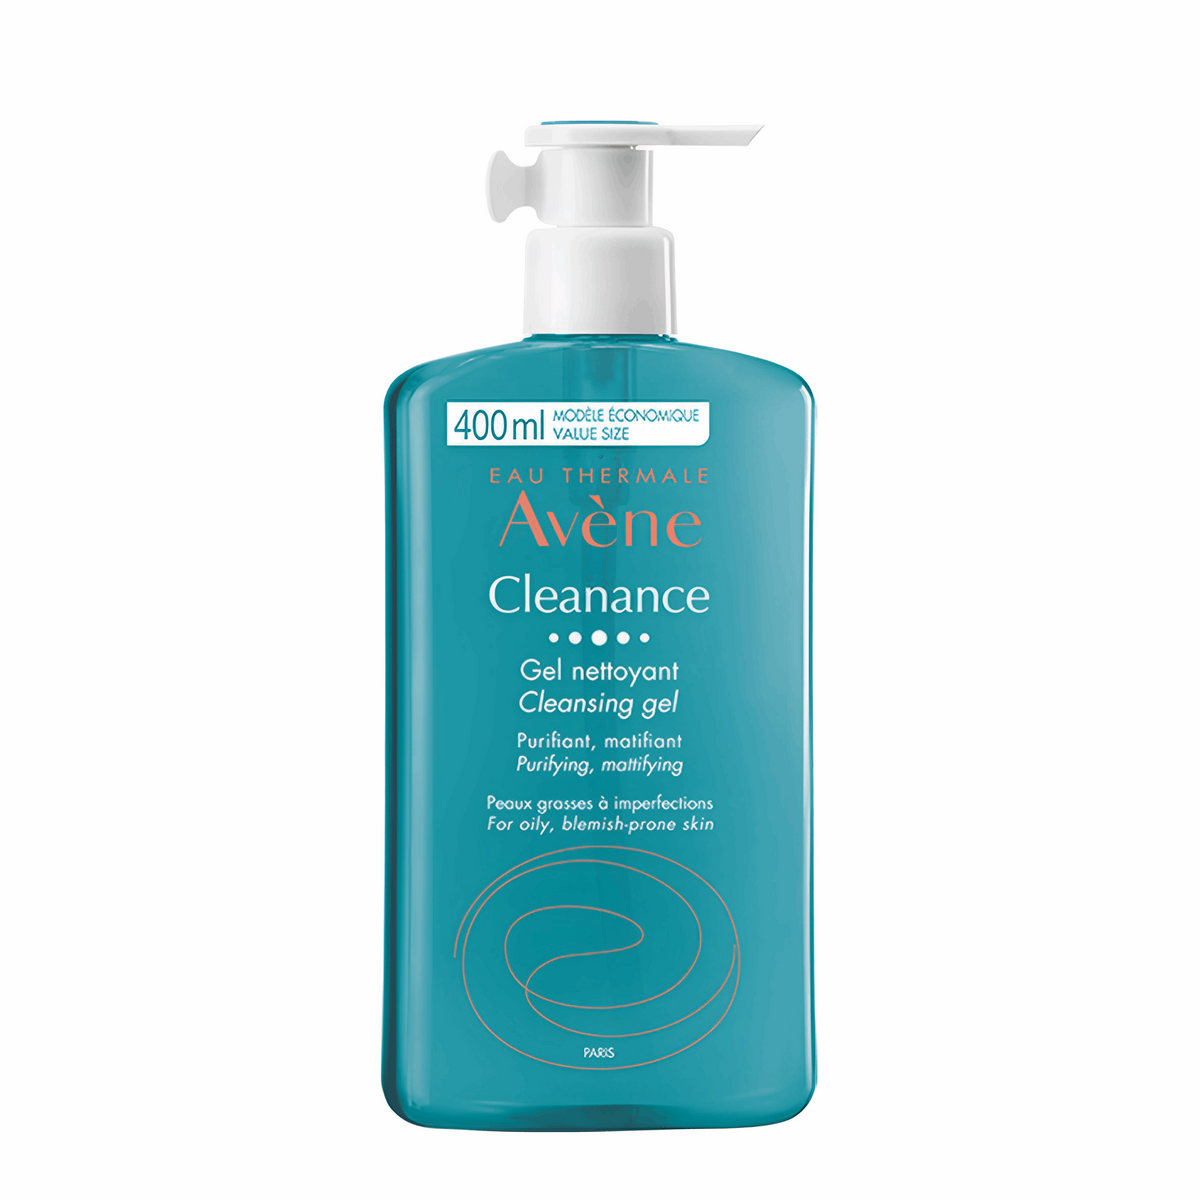 GEL NETTOYANT CLEANANCE AVÈNE - Premium  from DION - Just DA 4100! Shop now at DION